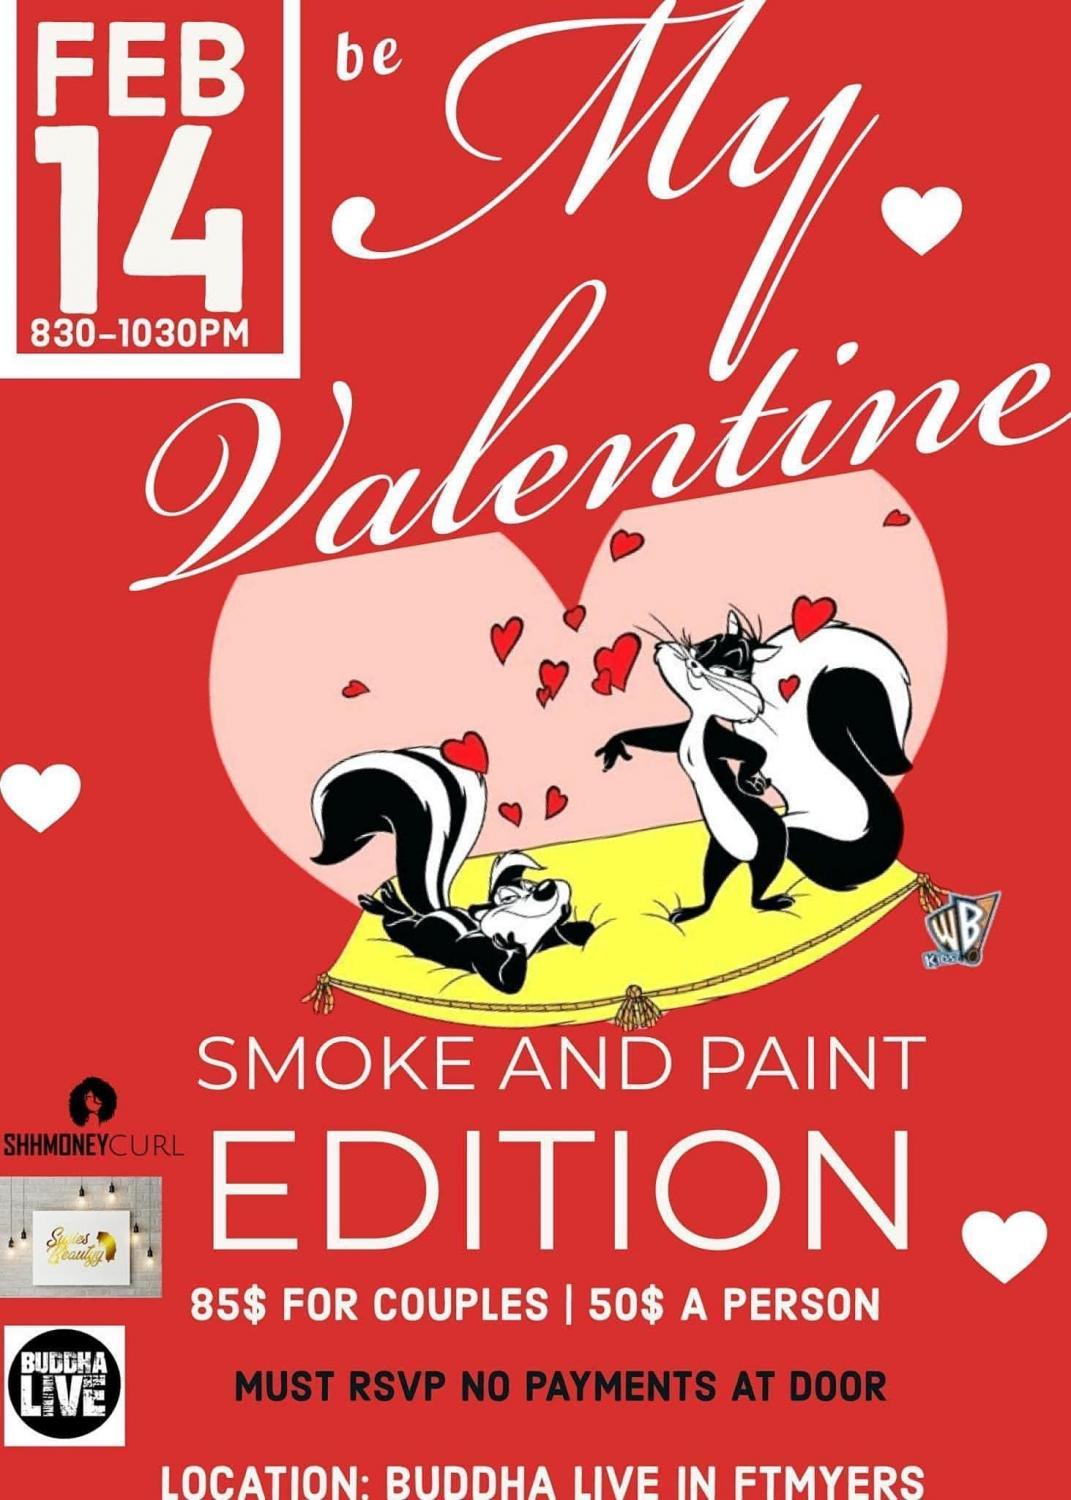 Valentines Smoke and Paint